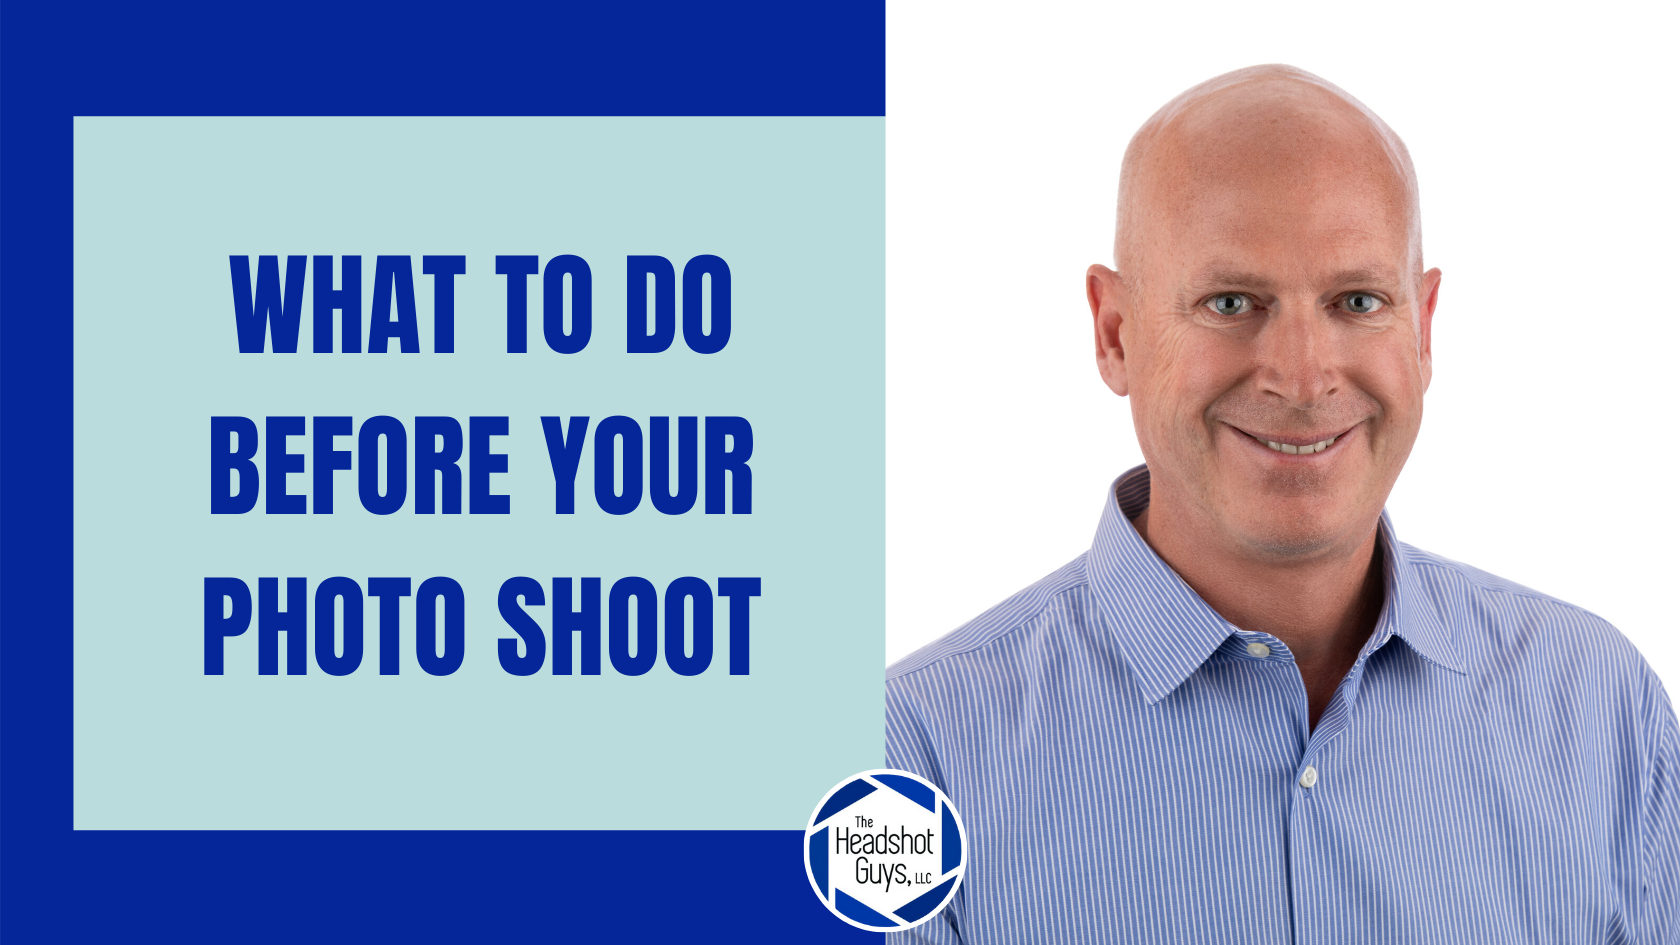 What To Do Before Your Photo Shoot